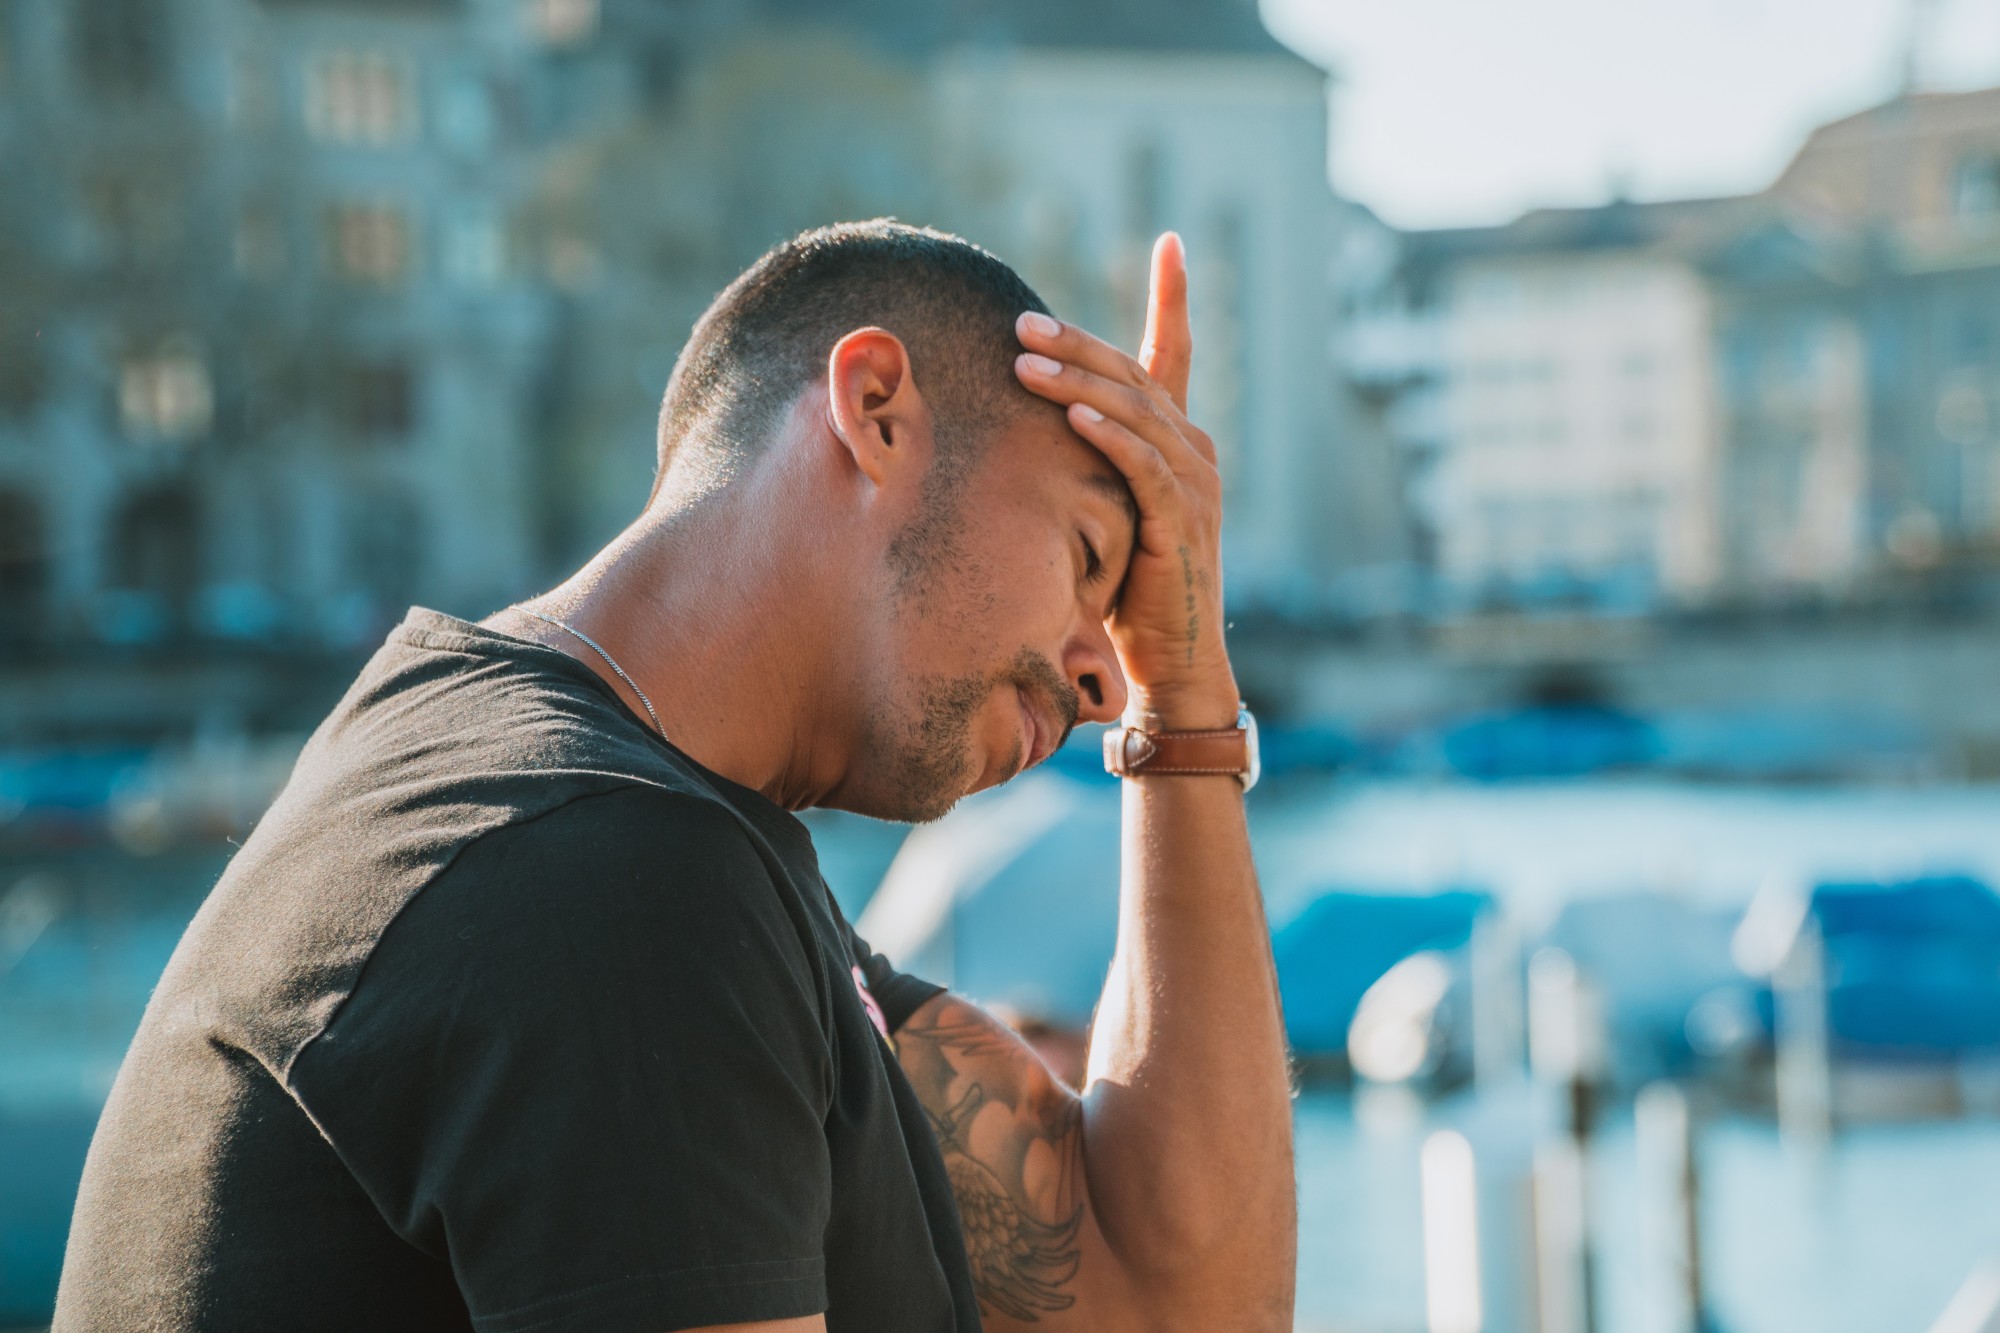 After experiencing high-stress situations, trauma, and personal injury, click here to discover the warning signs of combat stress and how to find help.